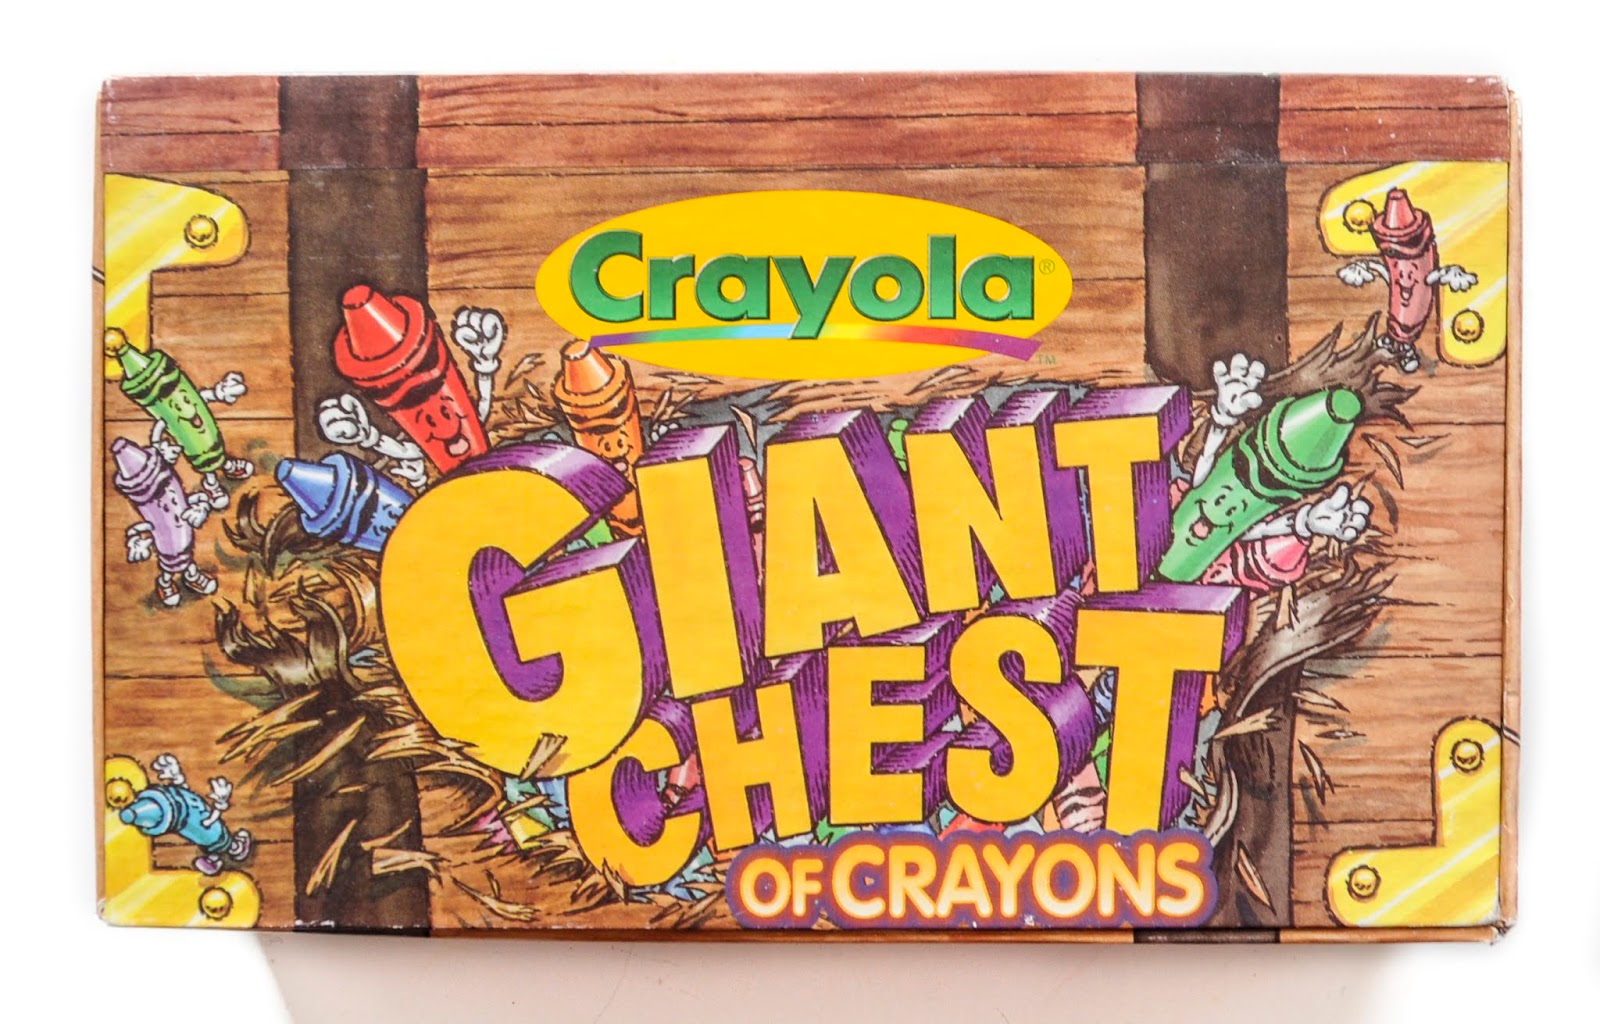 Giant Chest of Crayons: What's Inside the Box with Torch Red